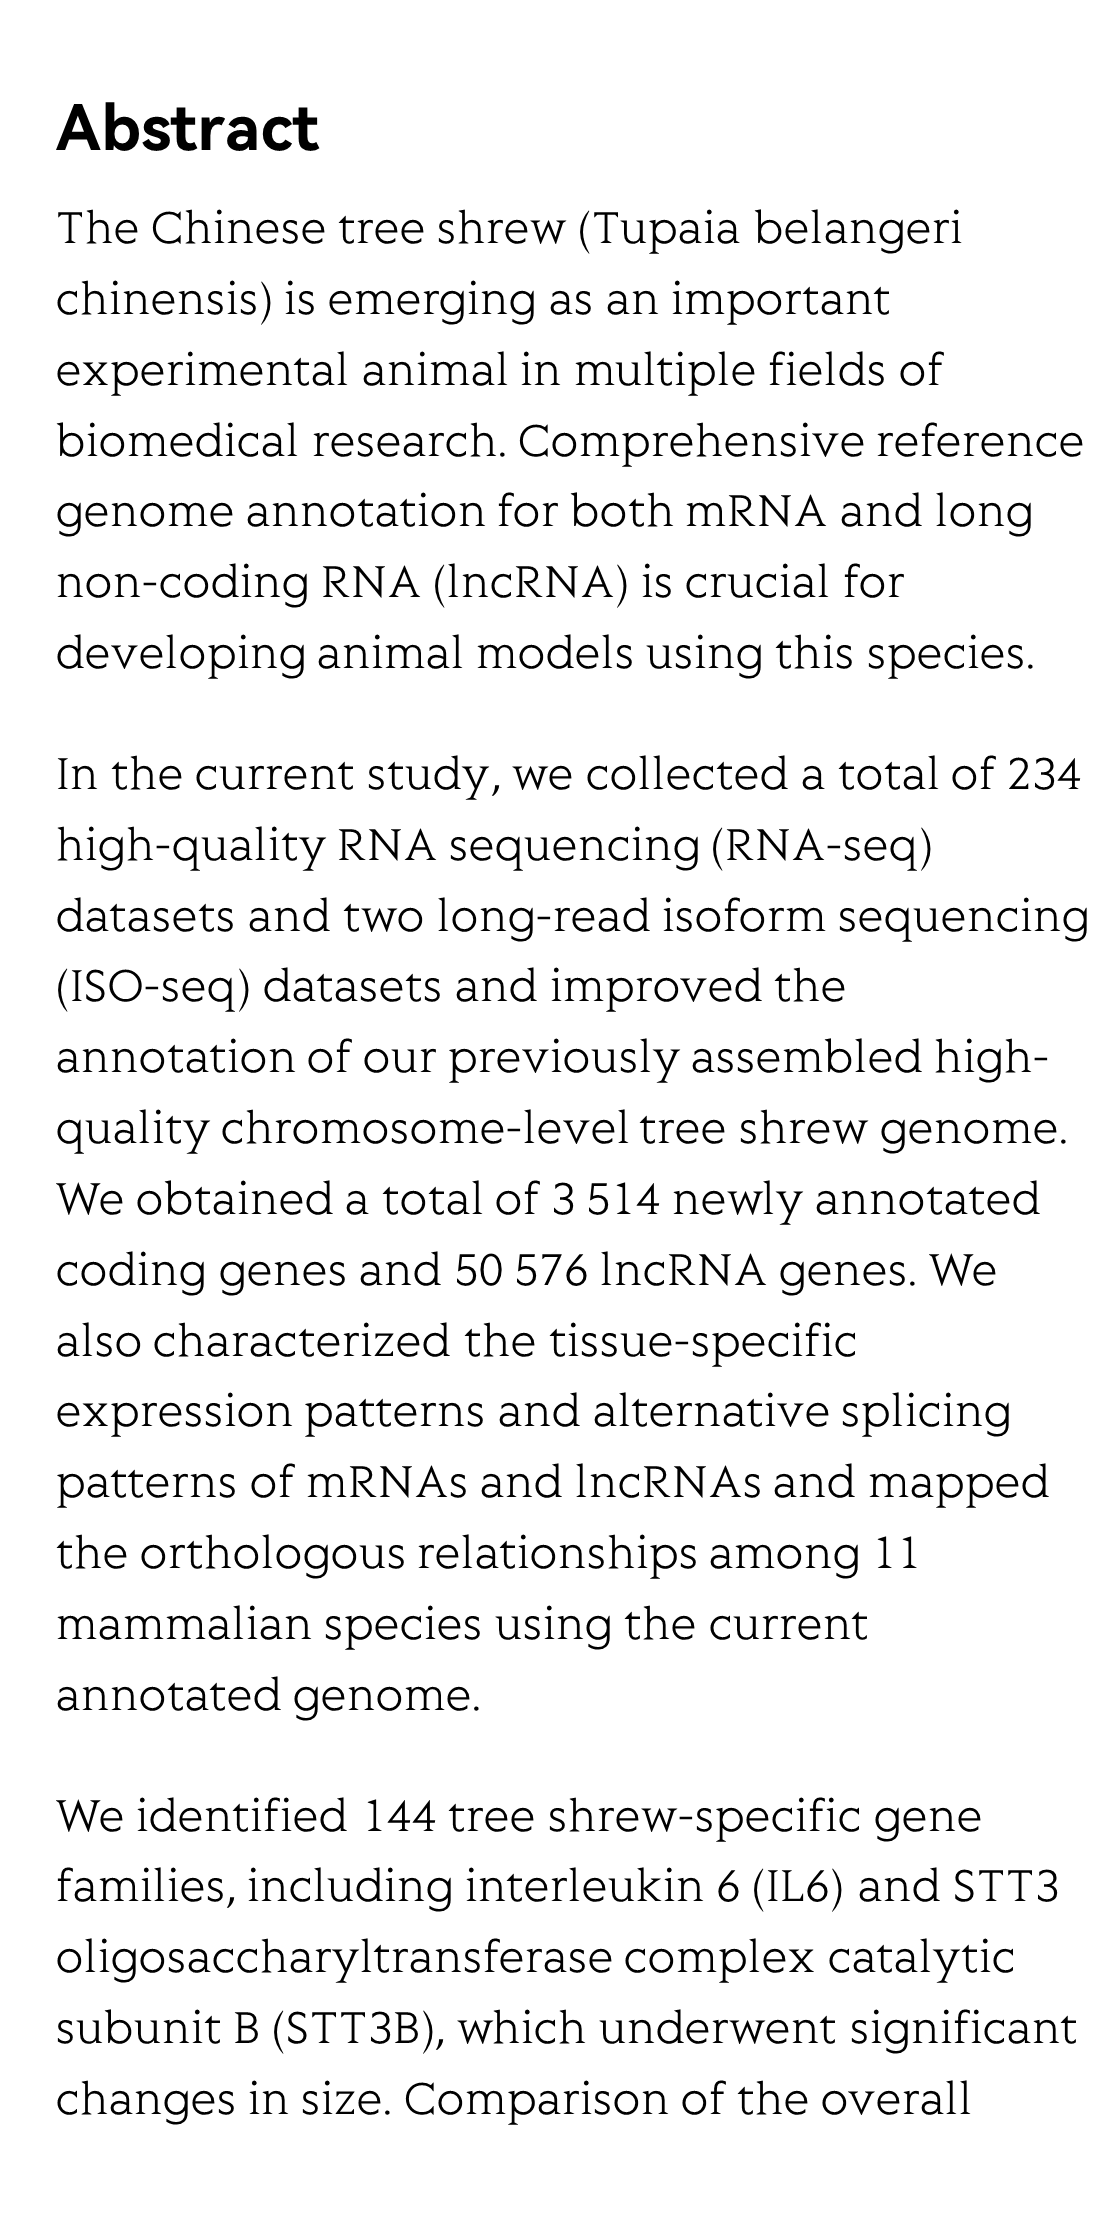 Comprehensive annotation of the Chinese tree shrew genome by large-scale RNA sequencing and long-read isoform sequencing_2